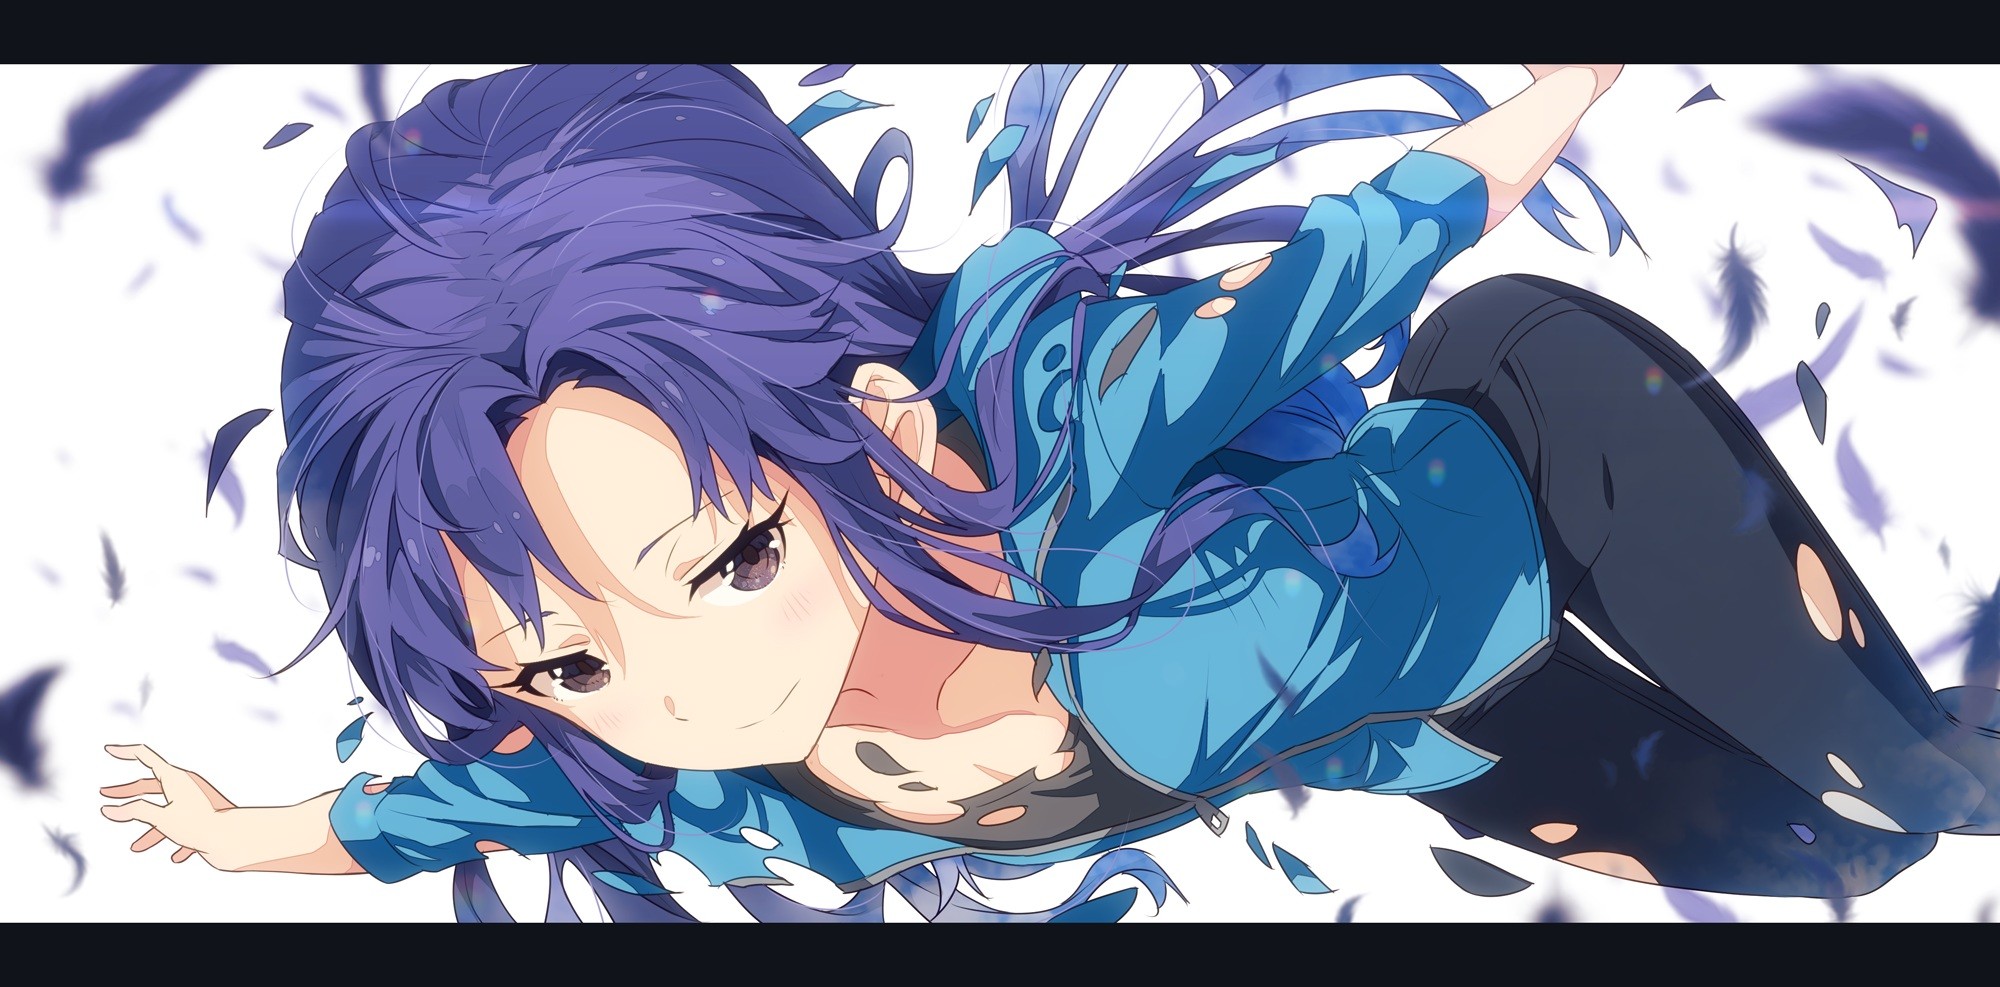 Anime 2000x987 Kisaragi Chihaya THE iDOLM@STER: Million Live! THE iDOLM@STER Narumi Arata anime girls feathers torn clothes jeans blue hair dark eyes anime women face purple hair white background